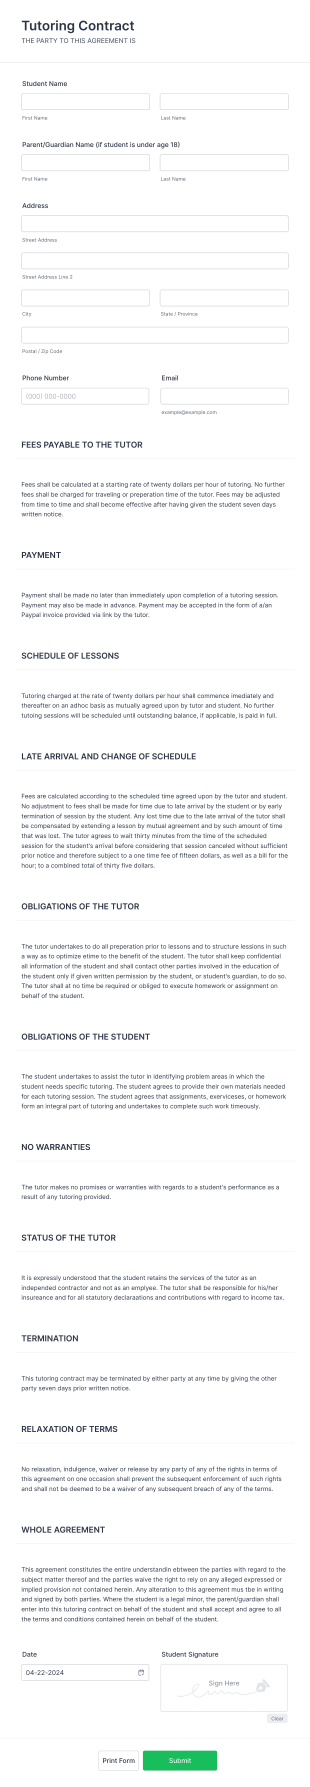 Tutoring Contract Form Template